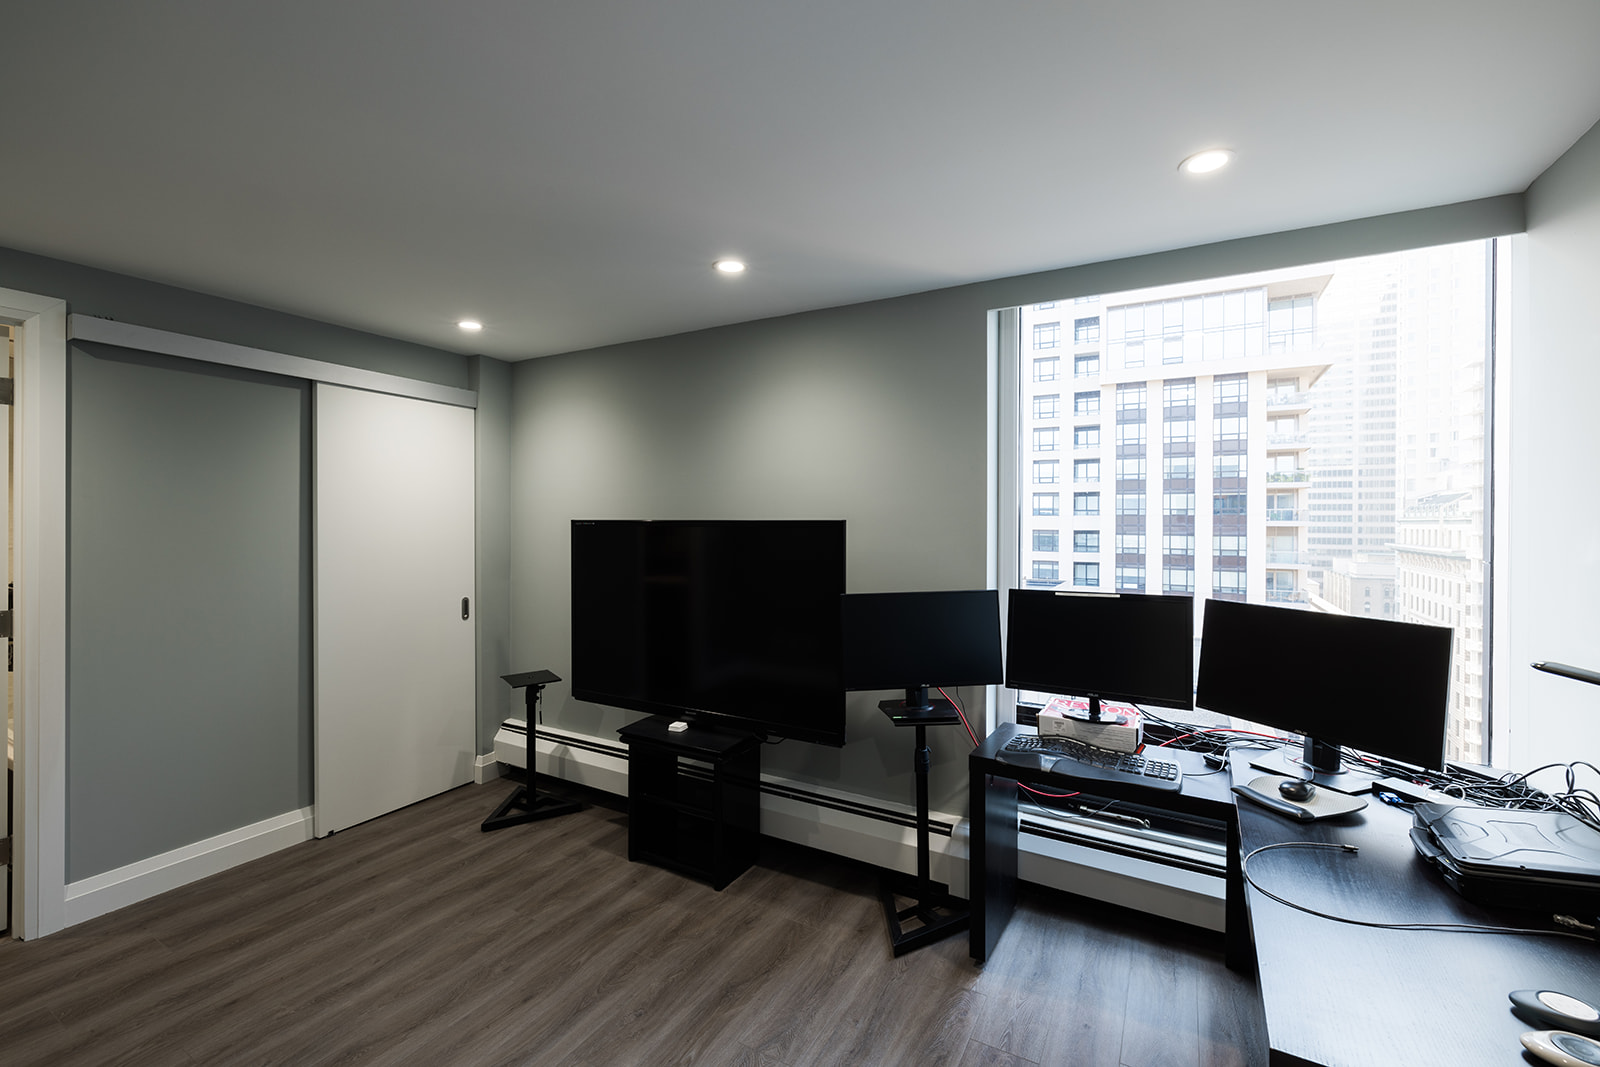 Flex room in downtown Toronto full condo renovation with recessed lighting and large window